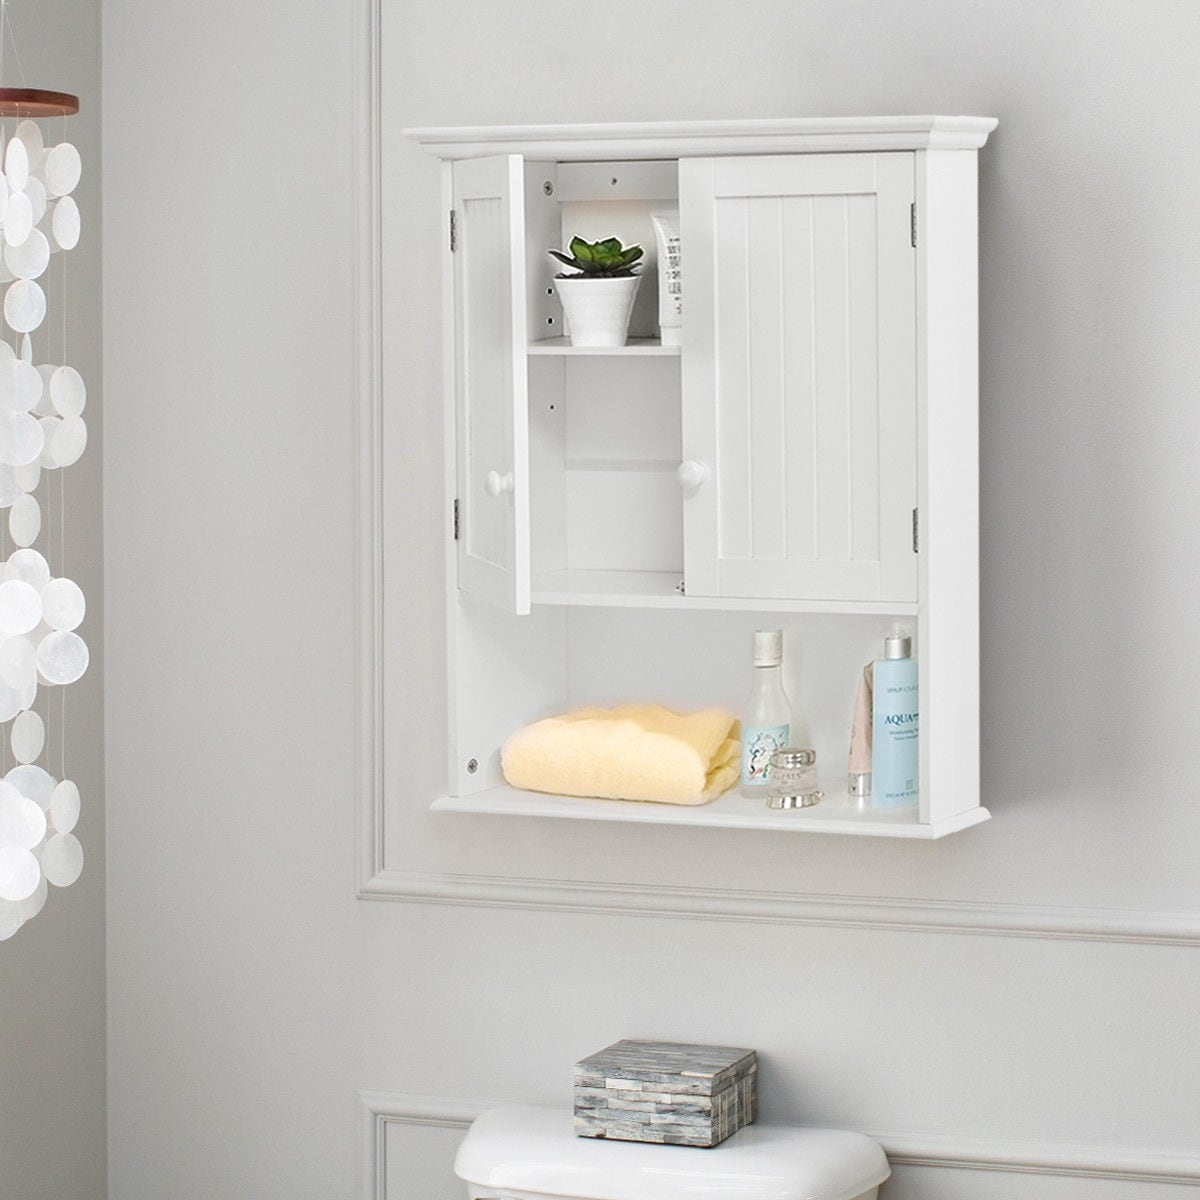 Bathroom Medicine Cabinet Wall Mounted Storage Organizer with Shelf - Painted - White